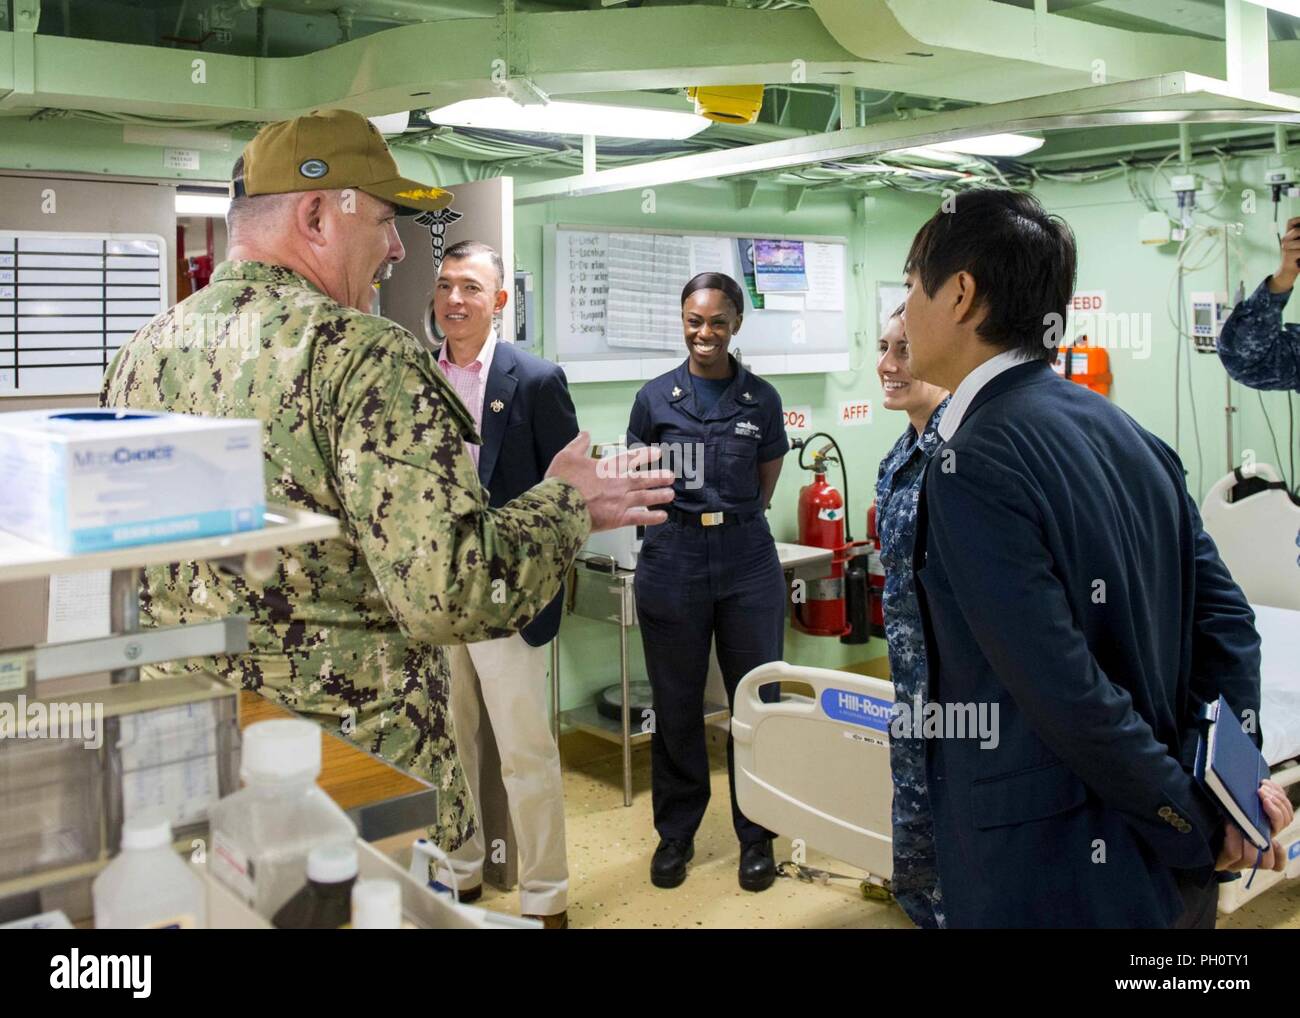 Japan (June 21, 2018) Capt. Michael Harris, executive officer of the San Antonio-class amphibious transport dock ship USS Green Bay (LPD 20), gives a tour of the medical bay to Takahiro Suzuki, Ministry of Foreign Affairs Status of Forces Agreement deputy director, North American Affairs Bureau, aboard Green Bay, June 21, 2018. The tour of CFAS and the ship was given to increase his understanding of CFAS’ capabilities in support of the U.S.-Japan alliance. Stock Photo